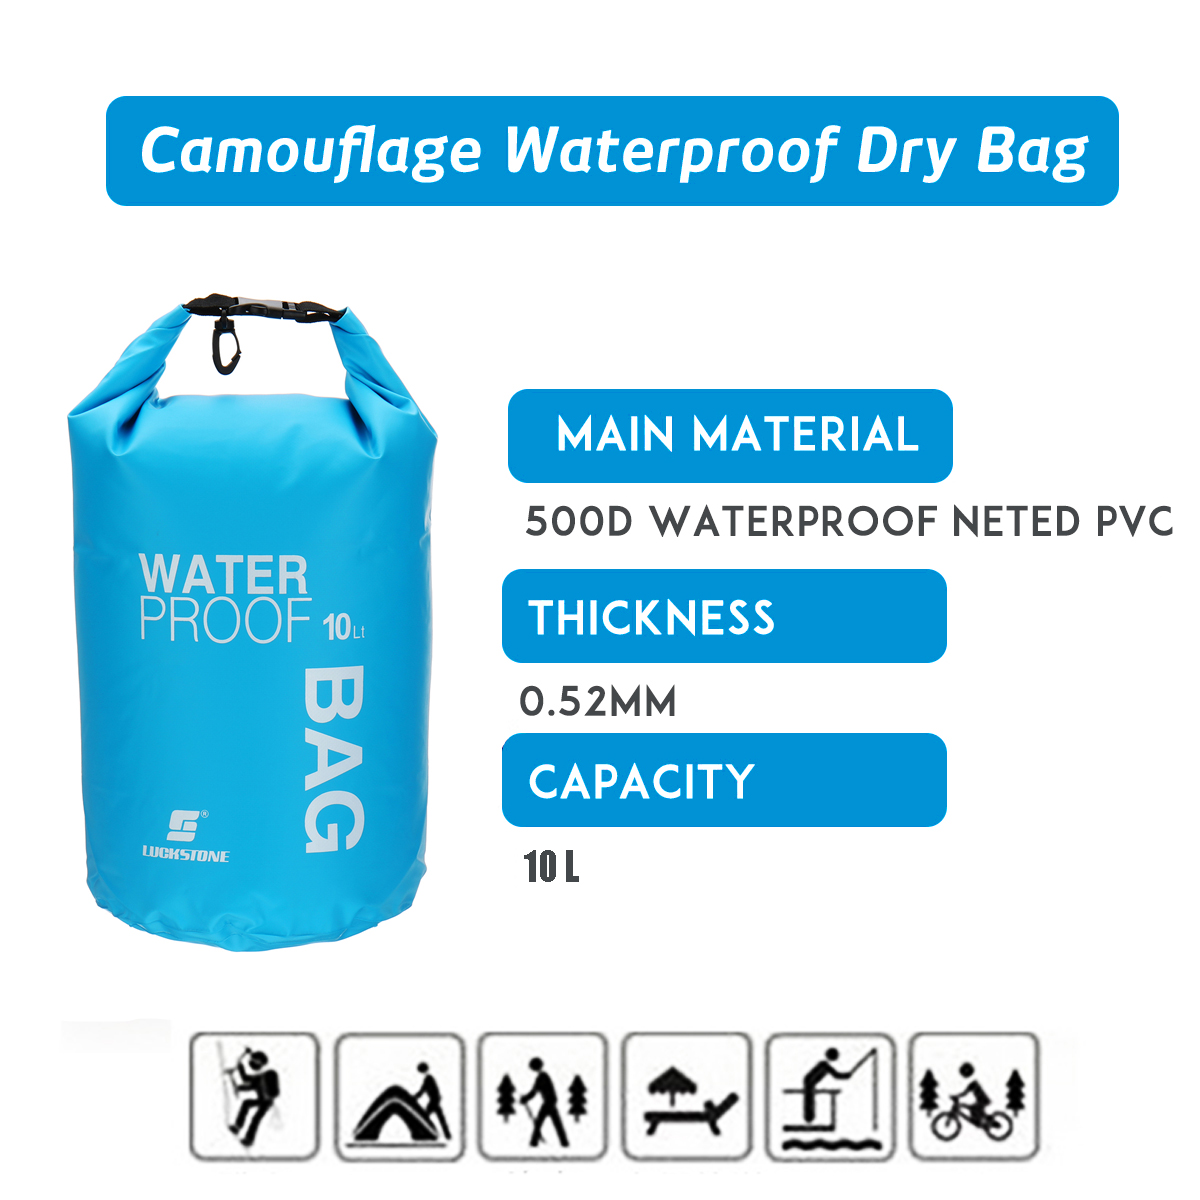 10L-Outdoor-Swimming-Air-Inflation-Floating-Mobile-Phone-Camera-Storage-PVC-Waterproof-Bag-1820807-2